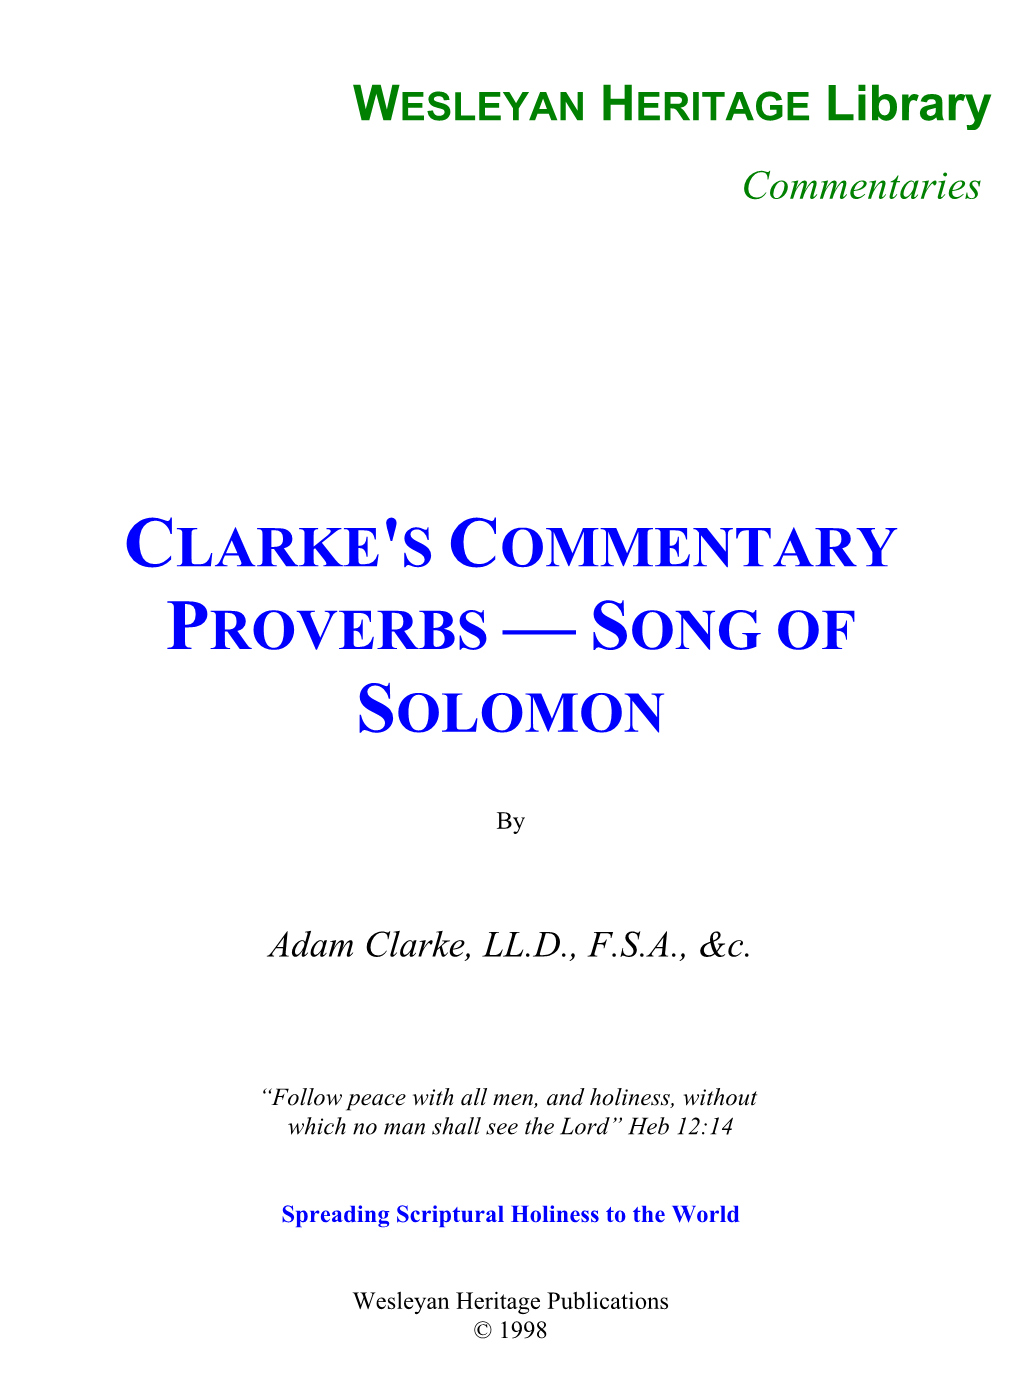 Clarke's Commentary Proverbs — Song of Solomon